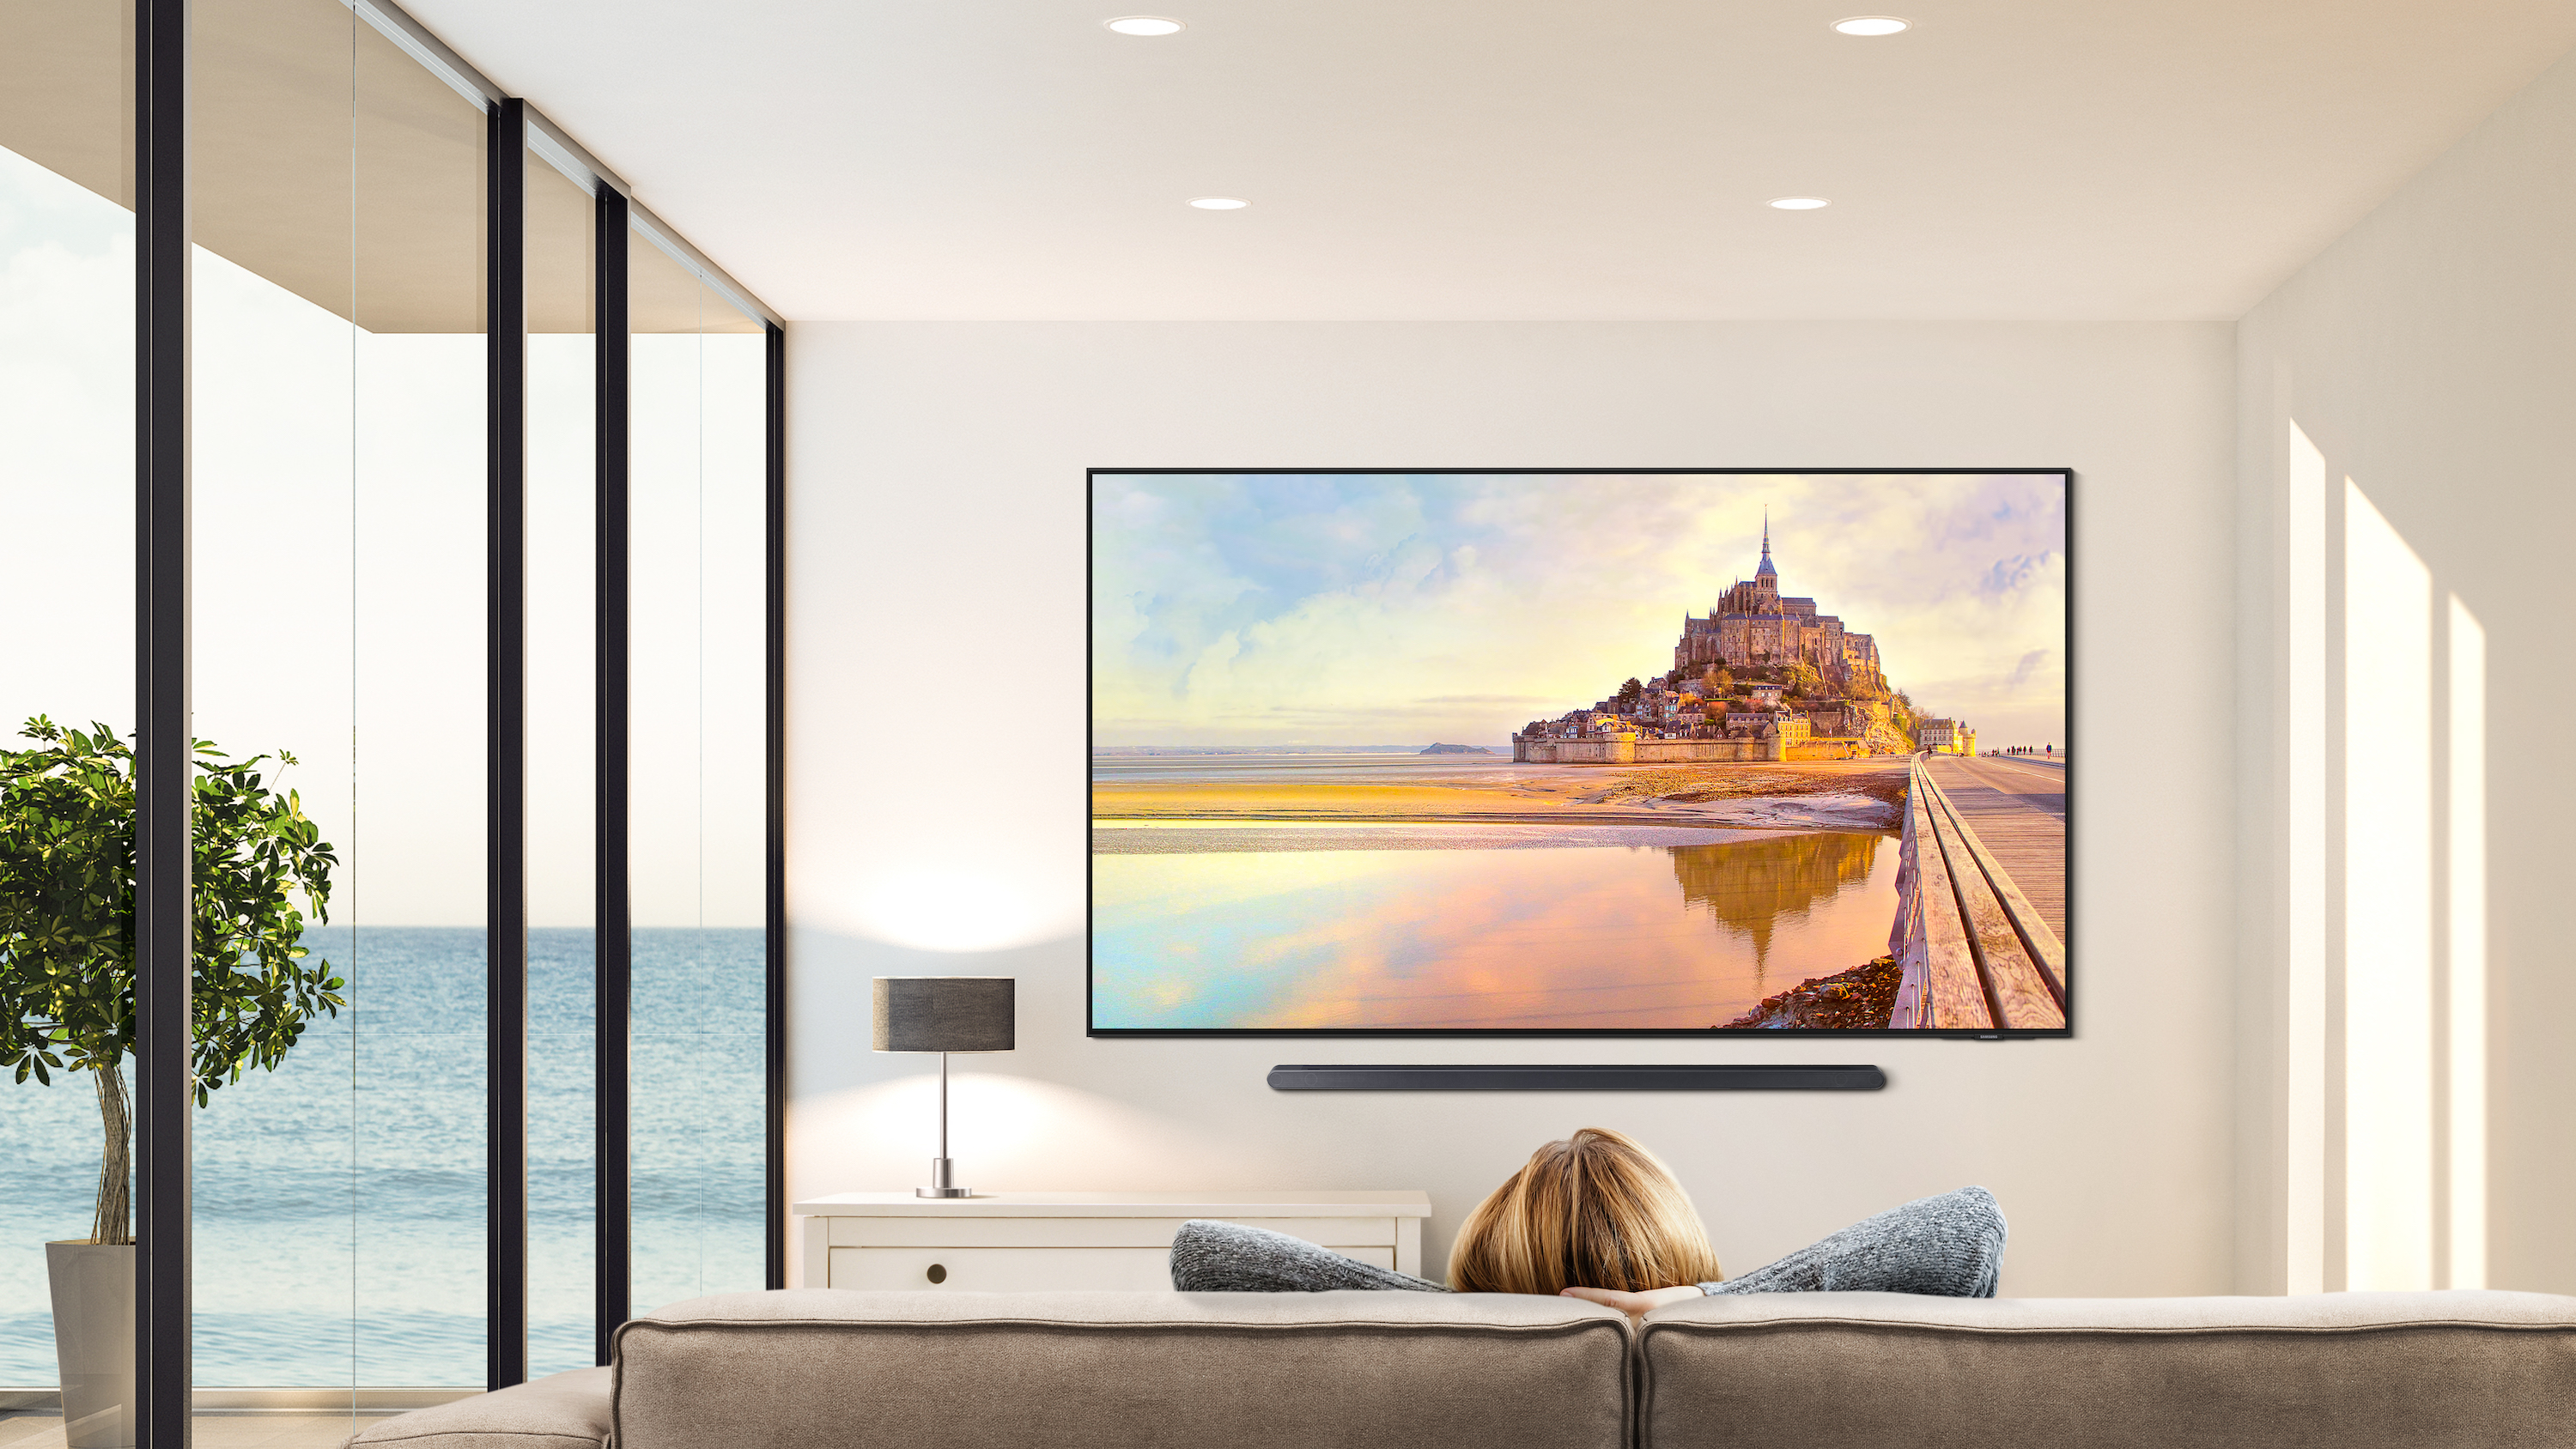 This 98-Inch TV Is Samsung’s Biggest Neo QLED 4K Set Yet